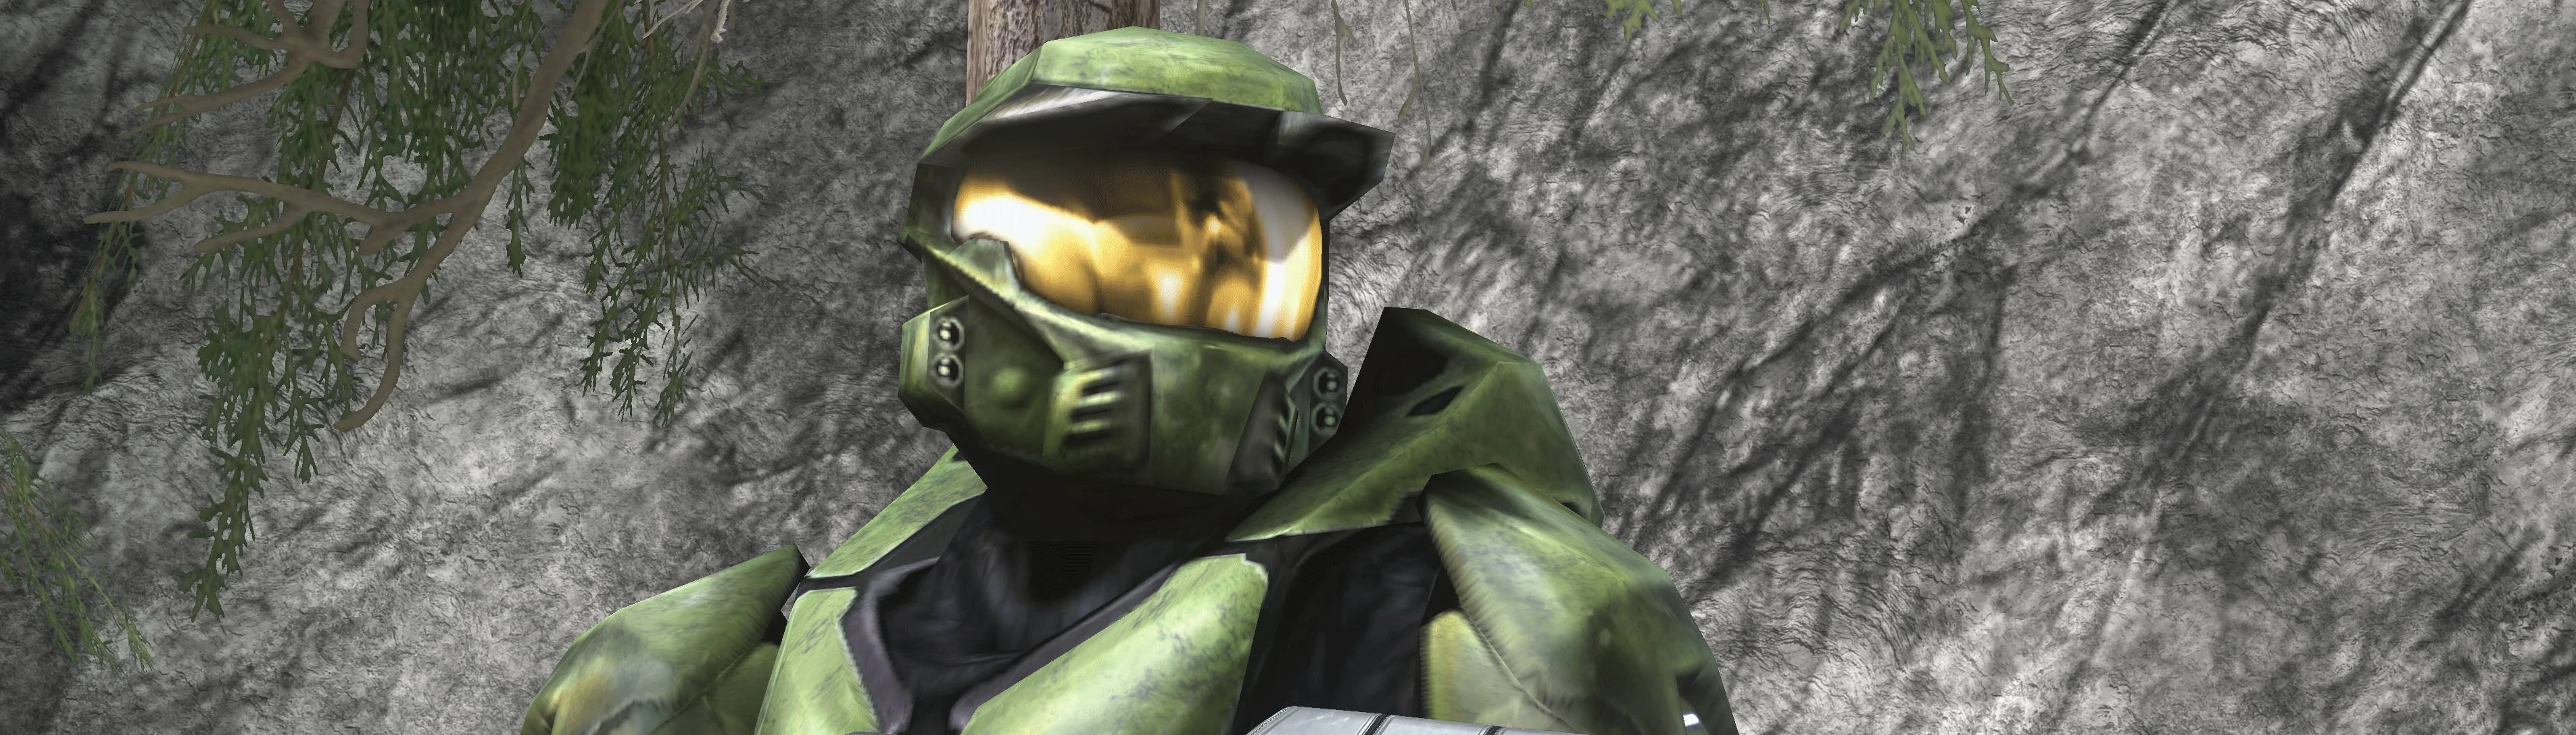 Halo Combat Evolved Spartan for the Halo 3 Editing Kit at Halo